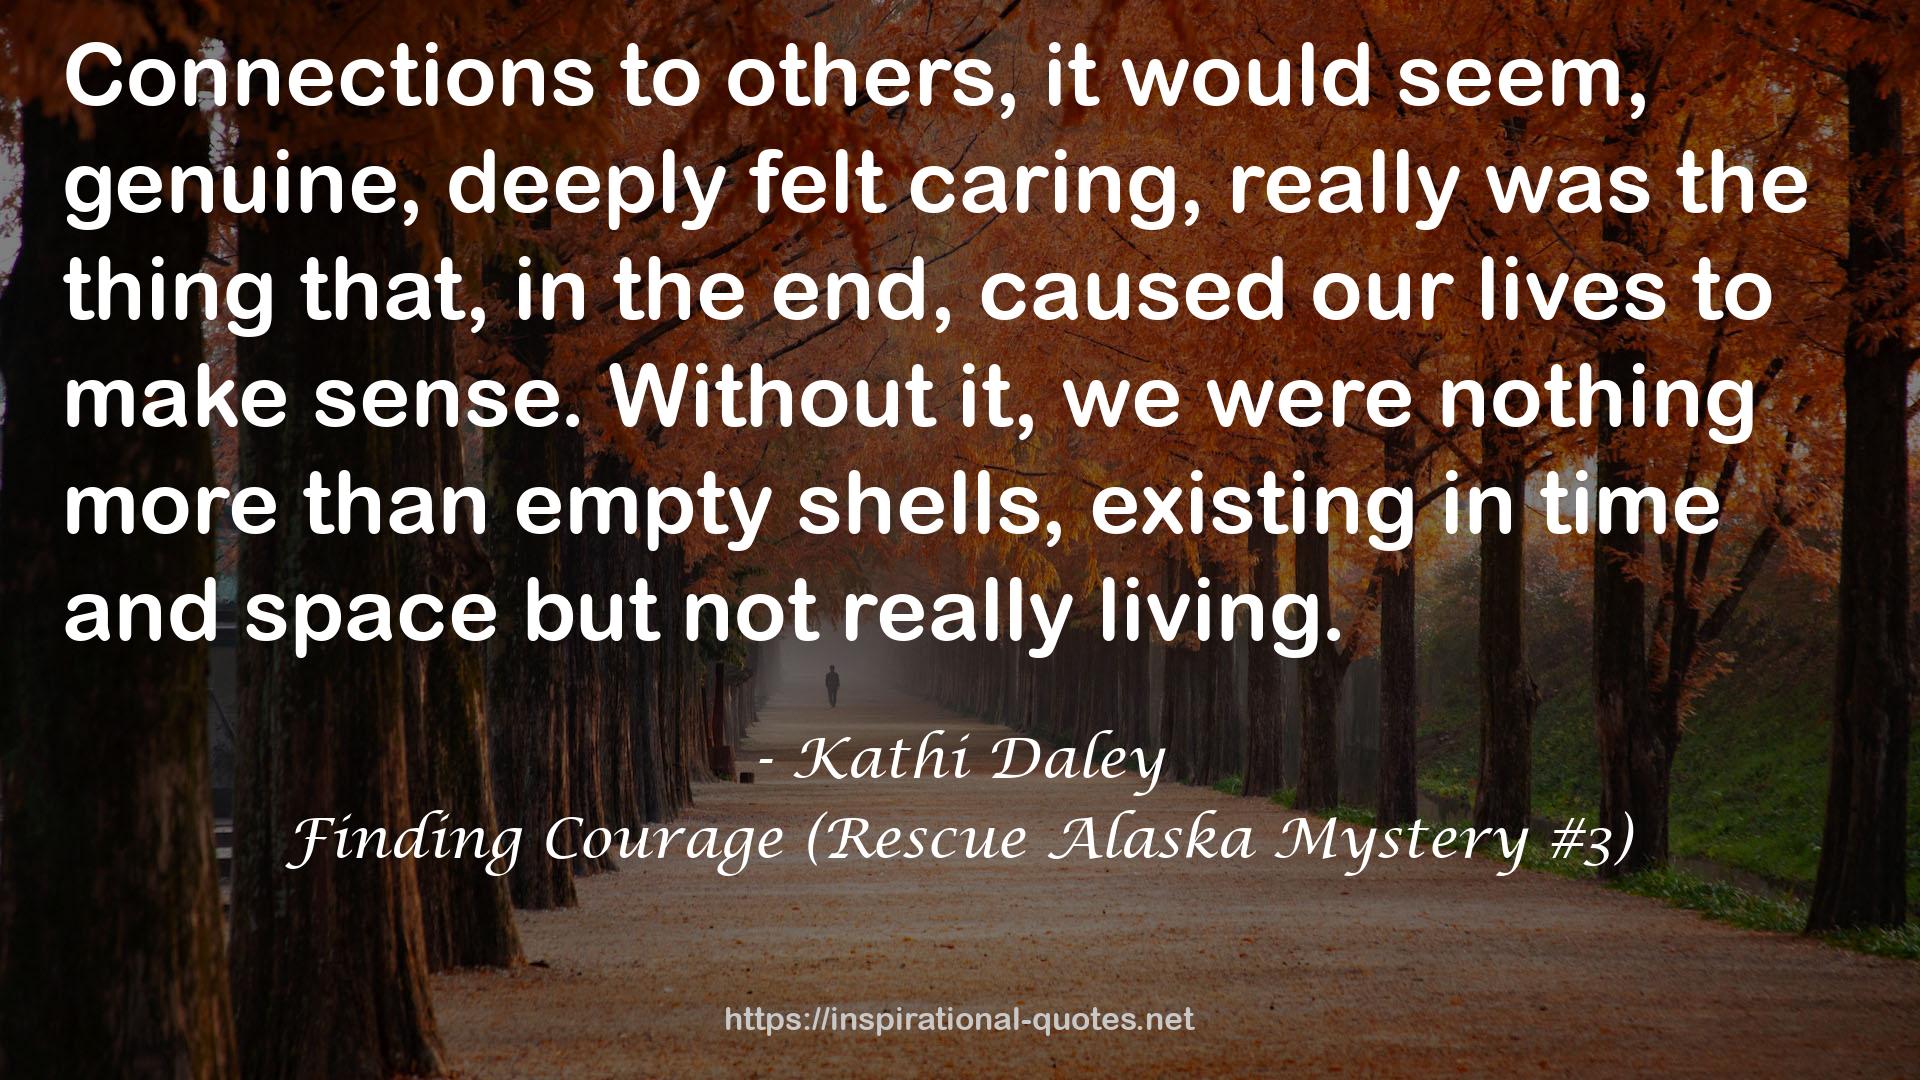 Finding Courage (Rescue Alaska Mystery #3) QUOTES